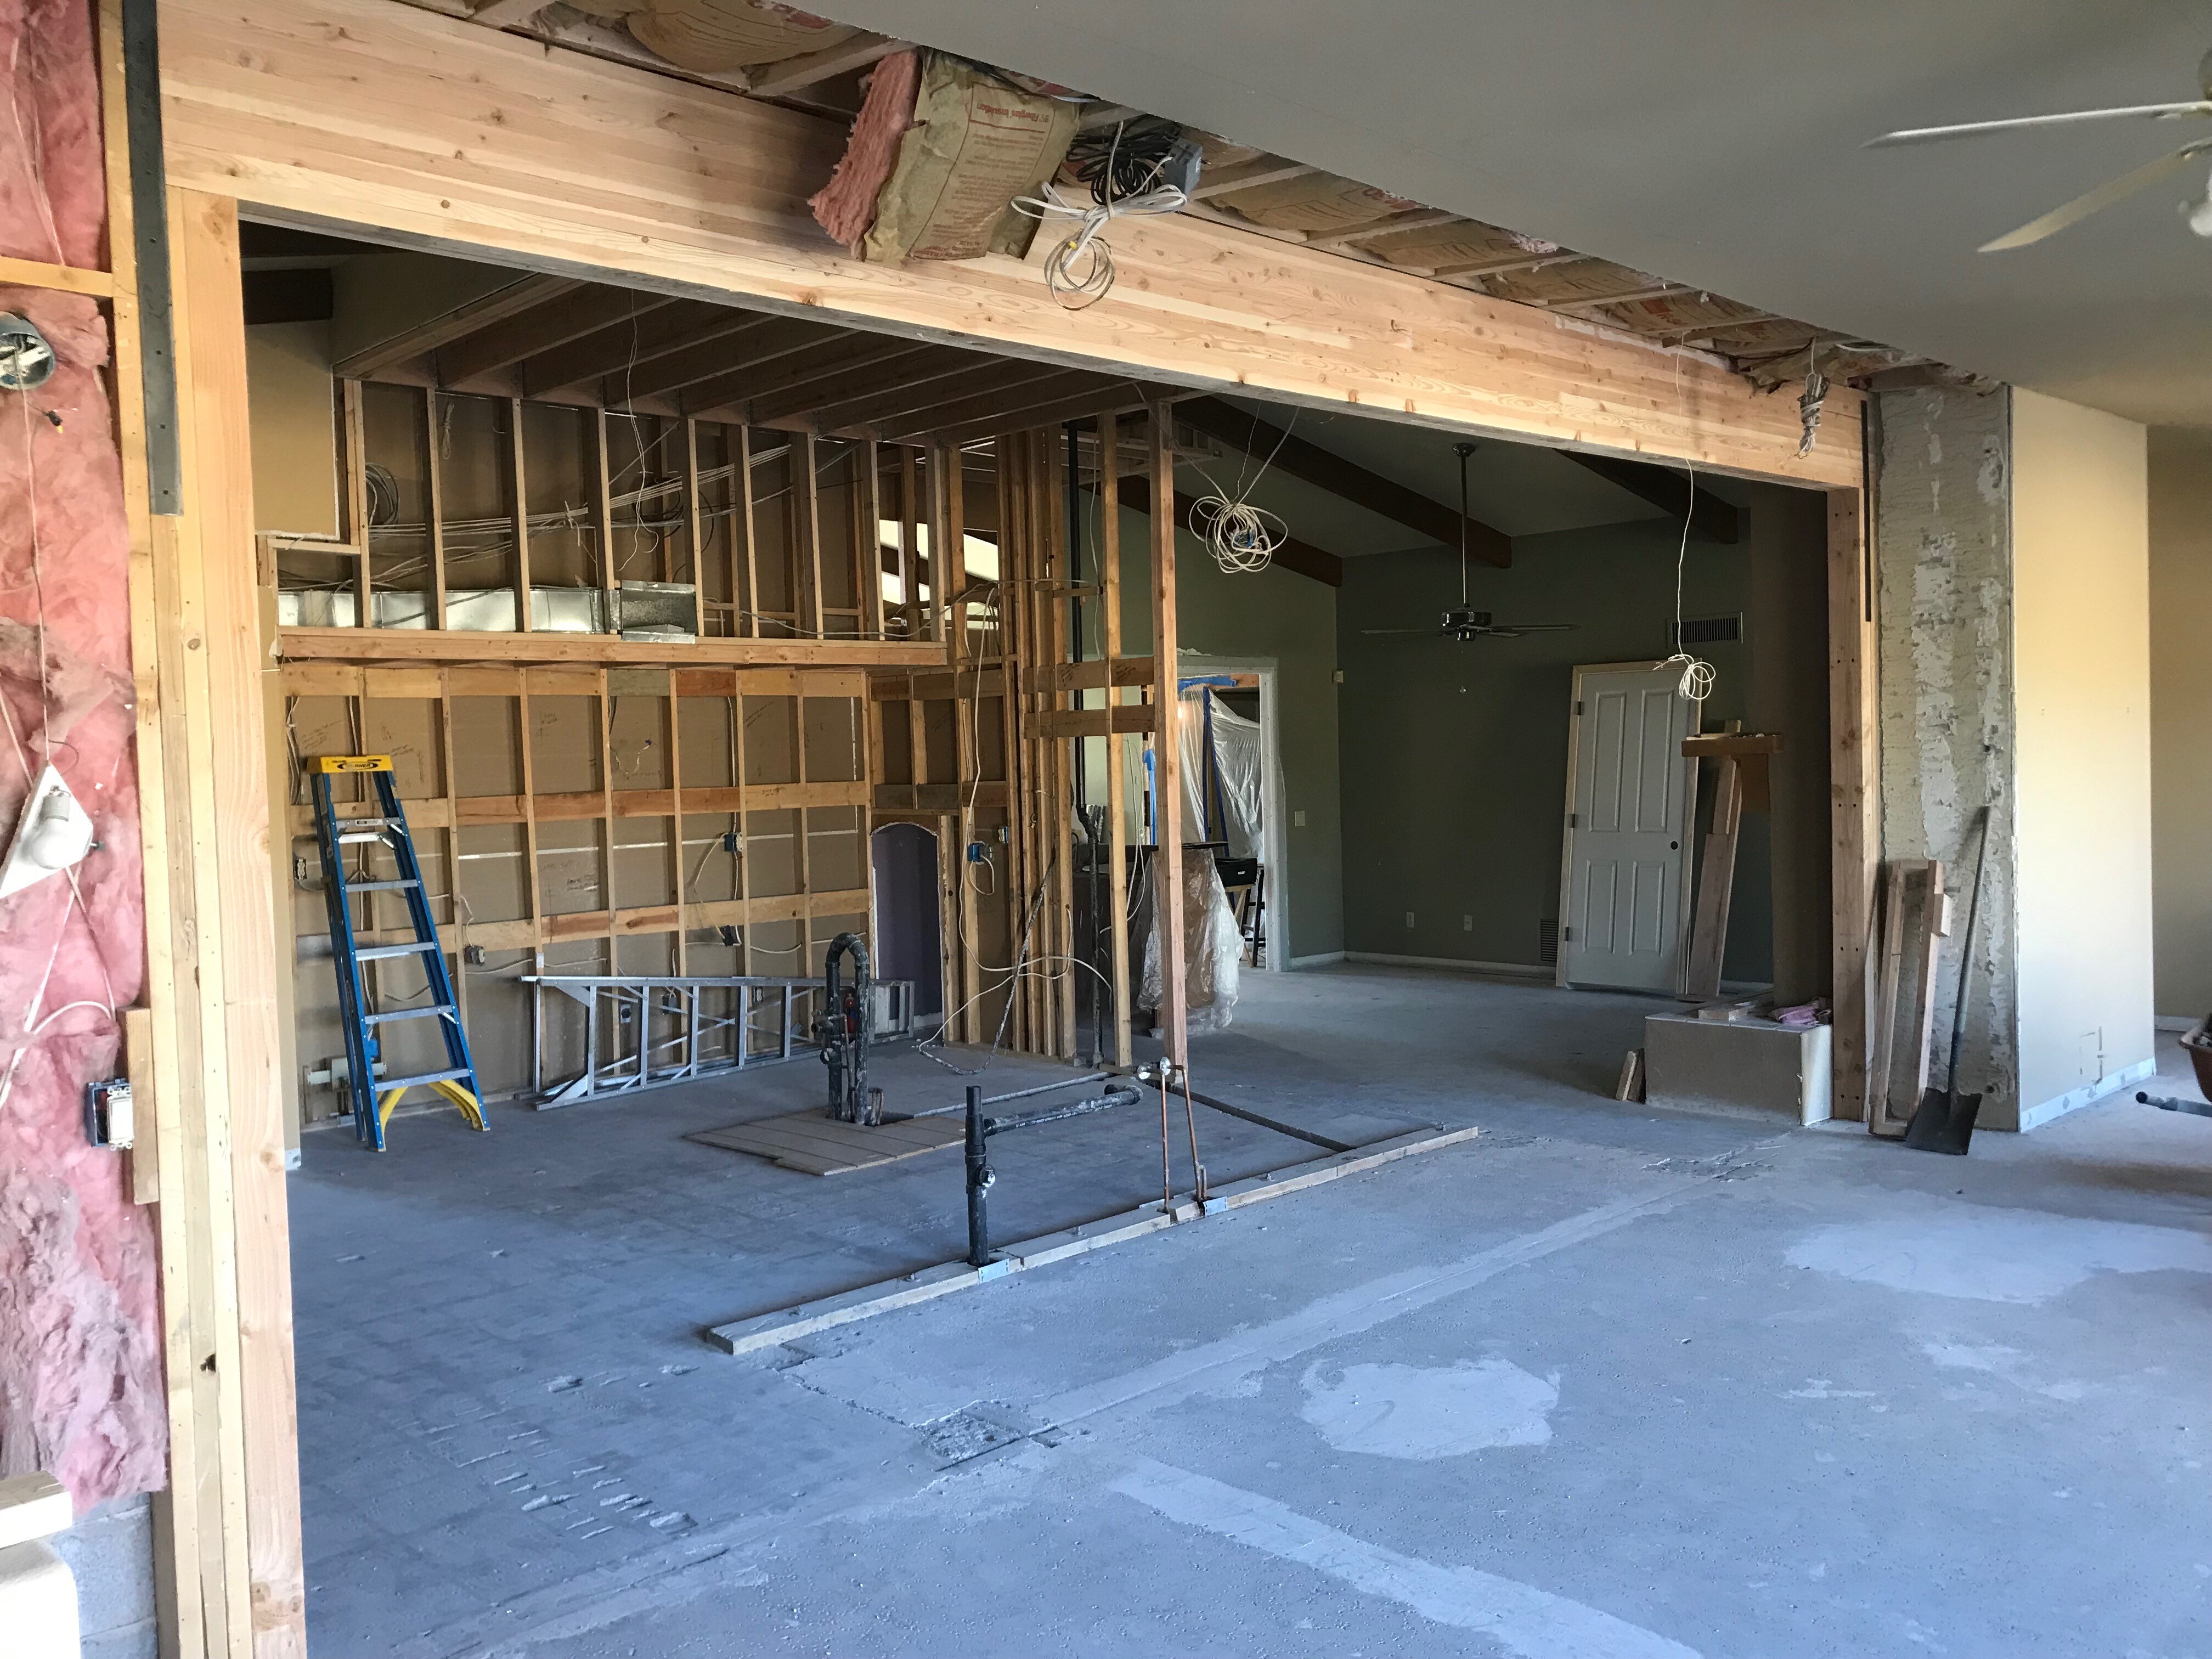 Structural Beam installed incorrectly in Scottsdale Home